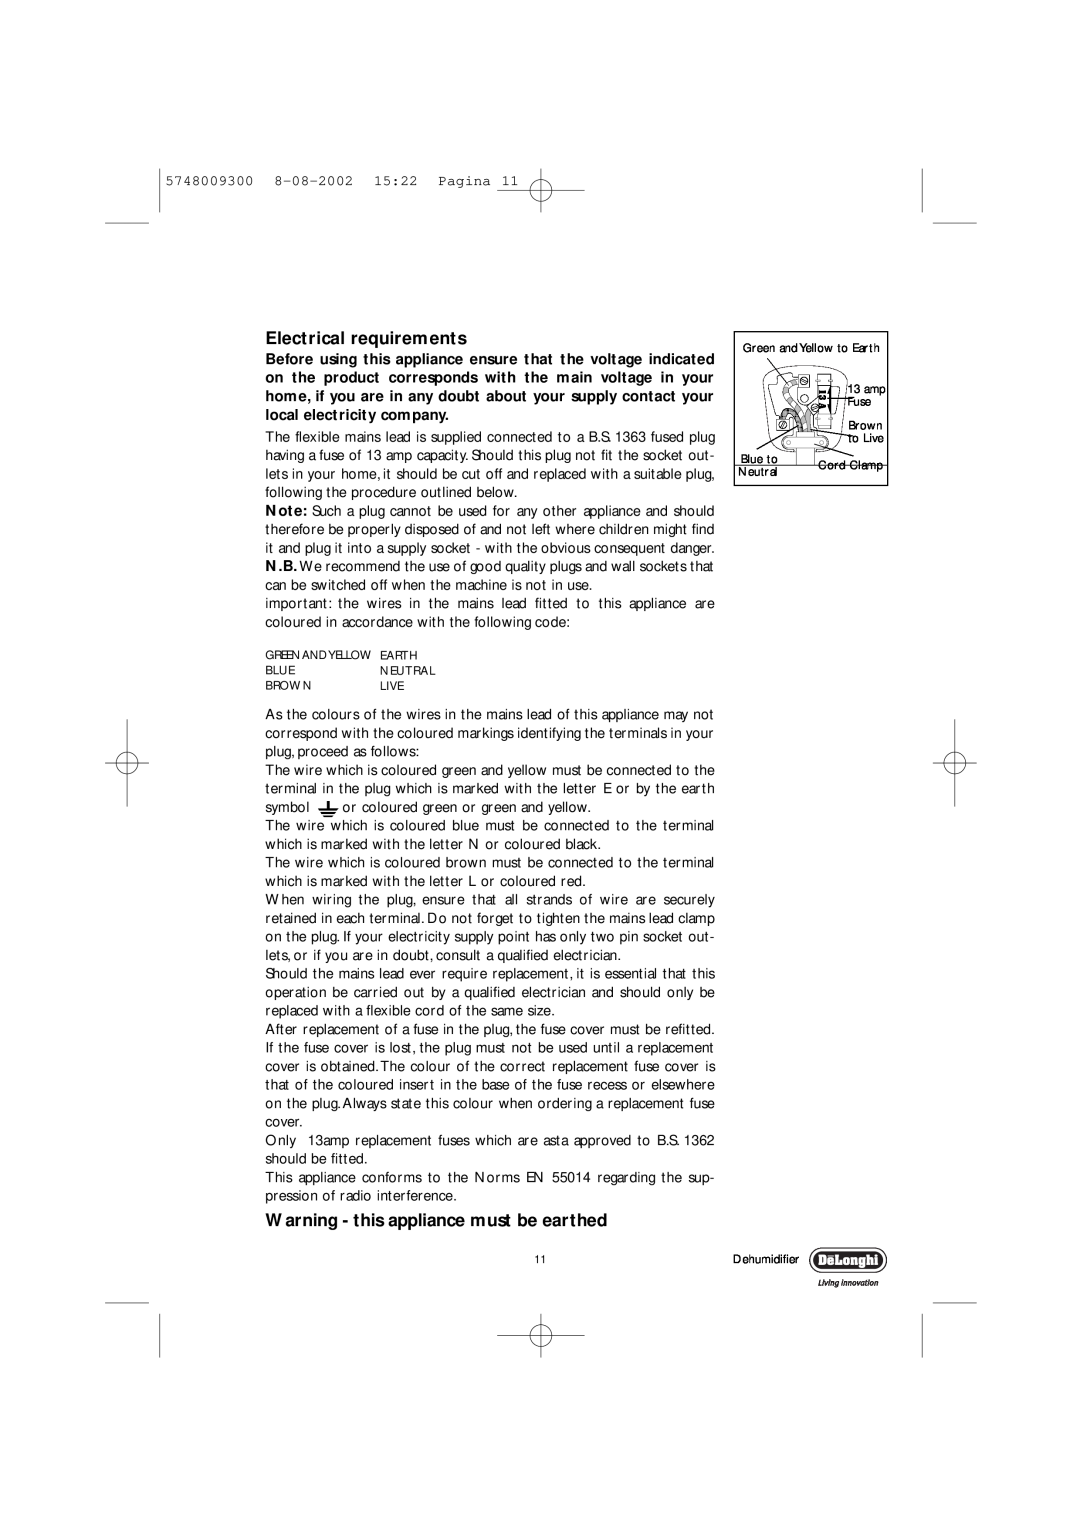 DeLonghi DEC12, DEC16 manual Electrical requirements, Warning - this appliance must be earthed 